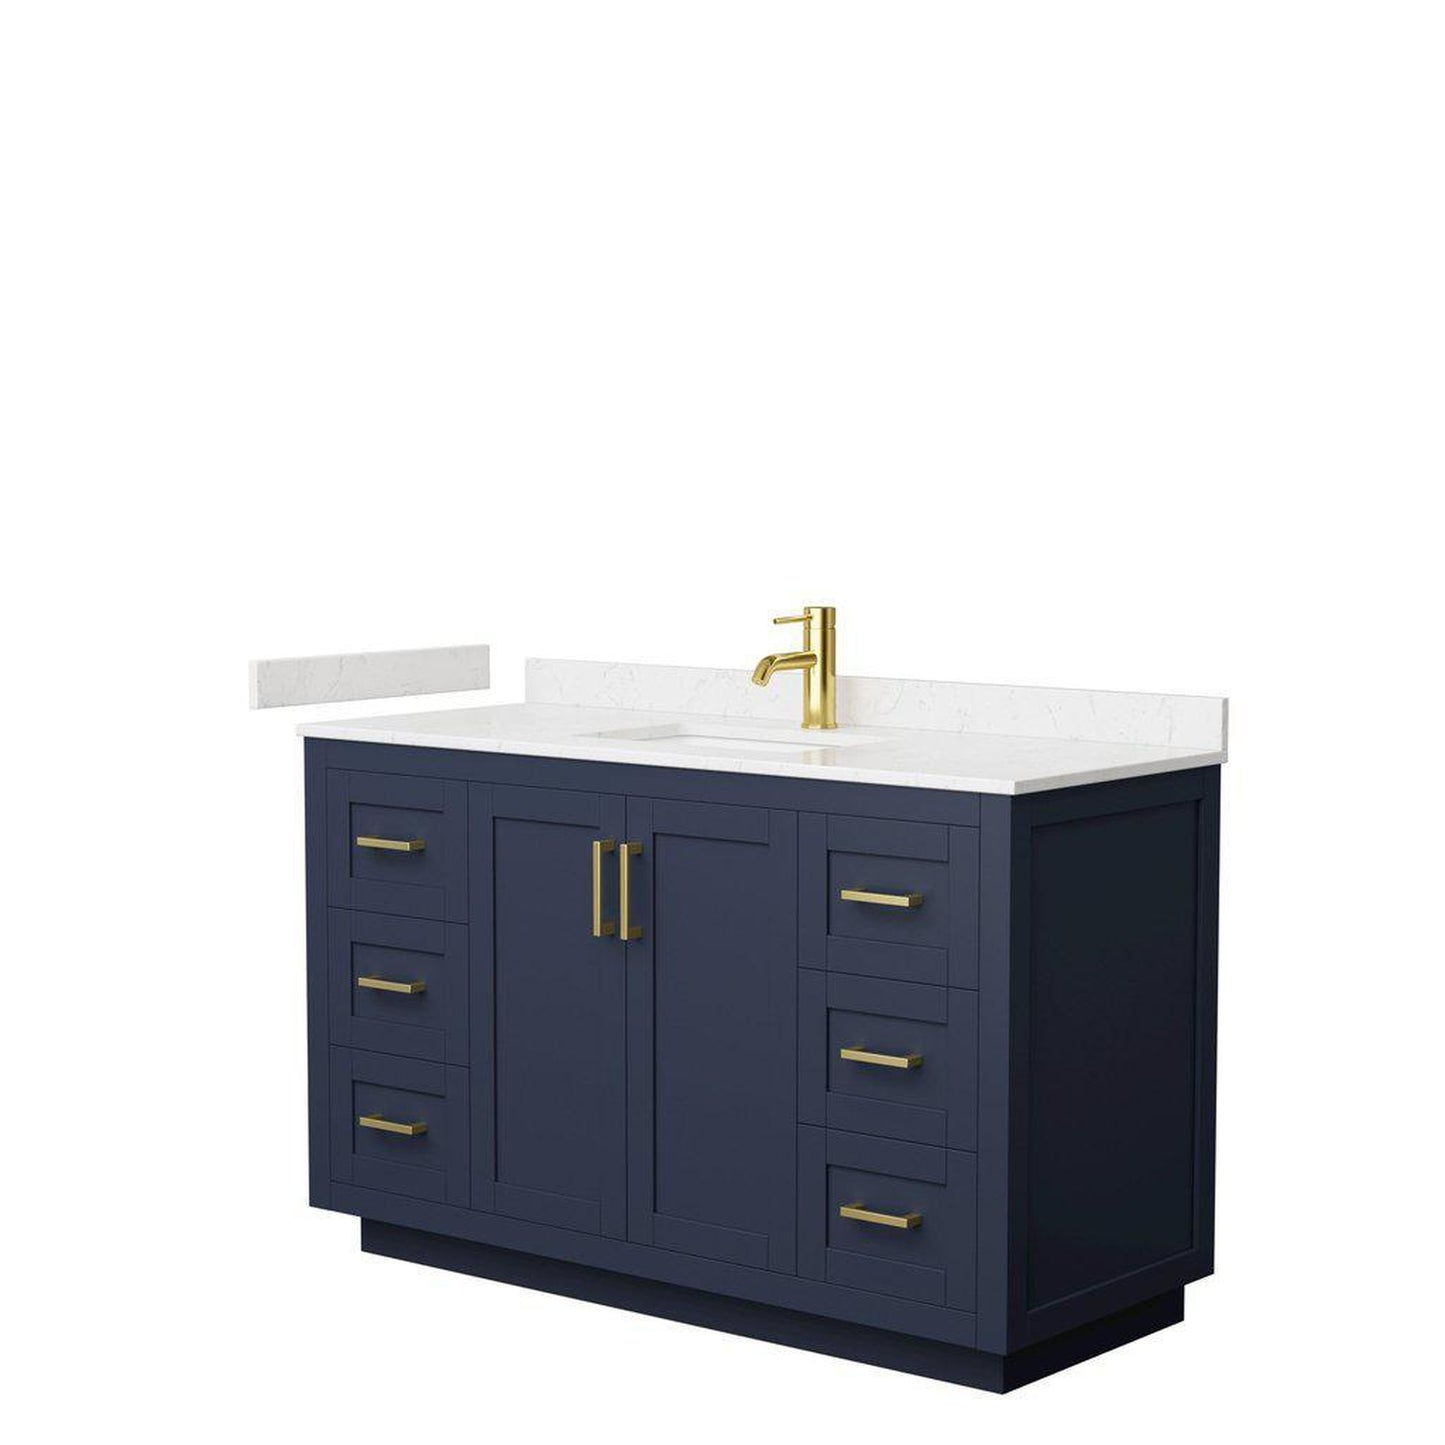 Wyndham Collection Miranda 54" Single Bathroom Dark Blue Vanity Set With Light-Vein Carrara Cultured Marble Countertop, Undermount Square Sink, And Brushed Gold Trim